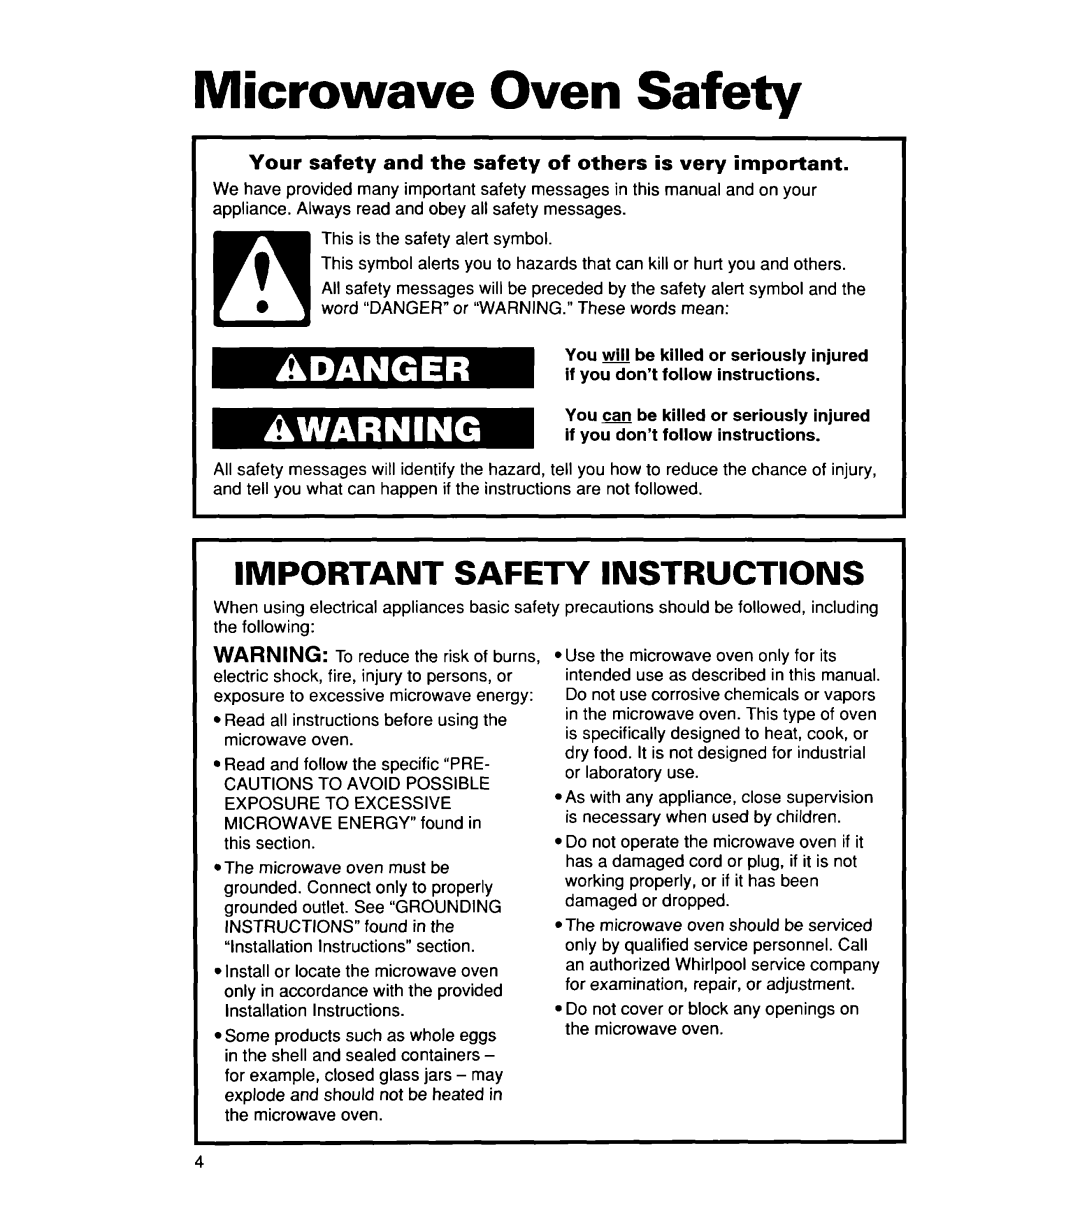 Whirlpool YMT8116SE, YMT9114SF, MT8118XE, MT8116XE, YMT8078SE, YMT8076SE Microwave Oven Safety, Important Safety Instructions 